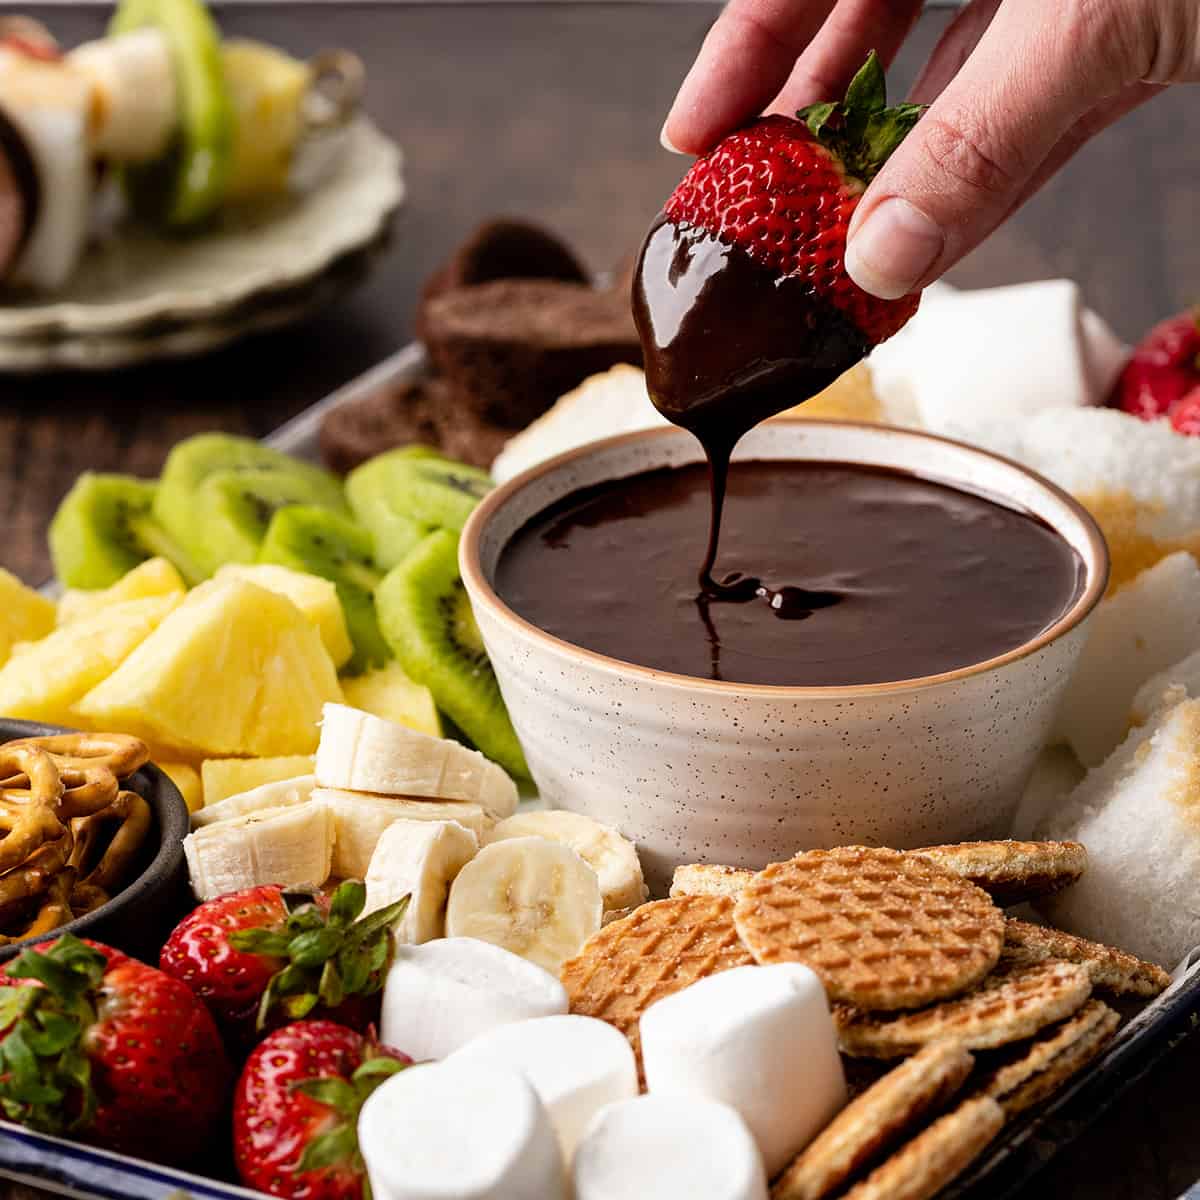 a strawberry being dipped into Chocolate Fondue